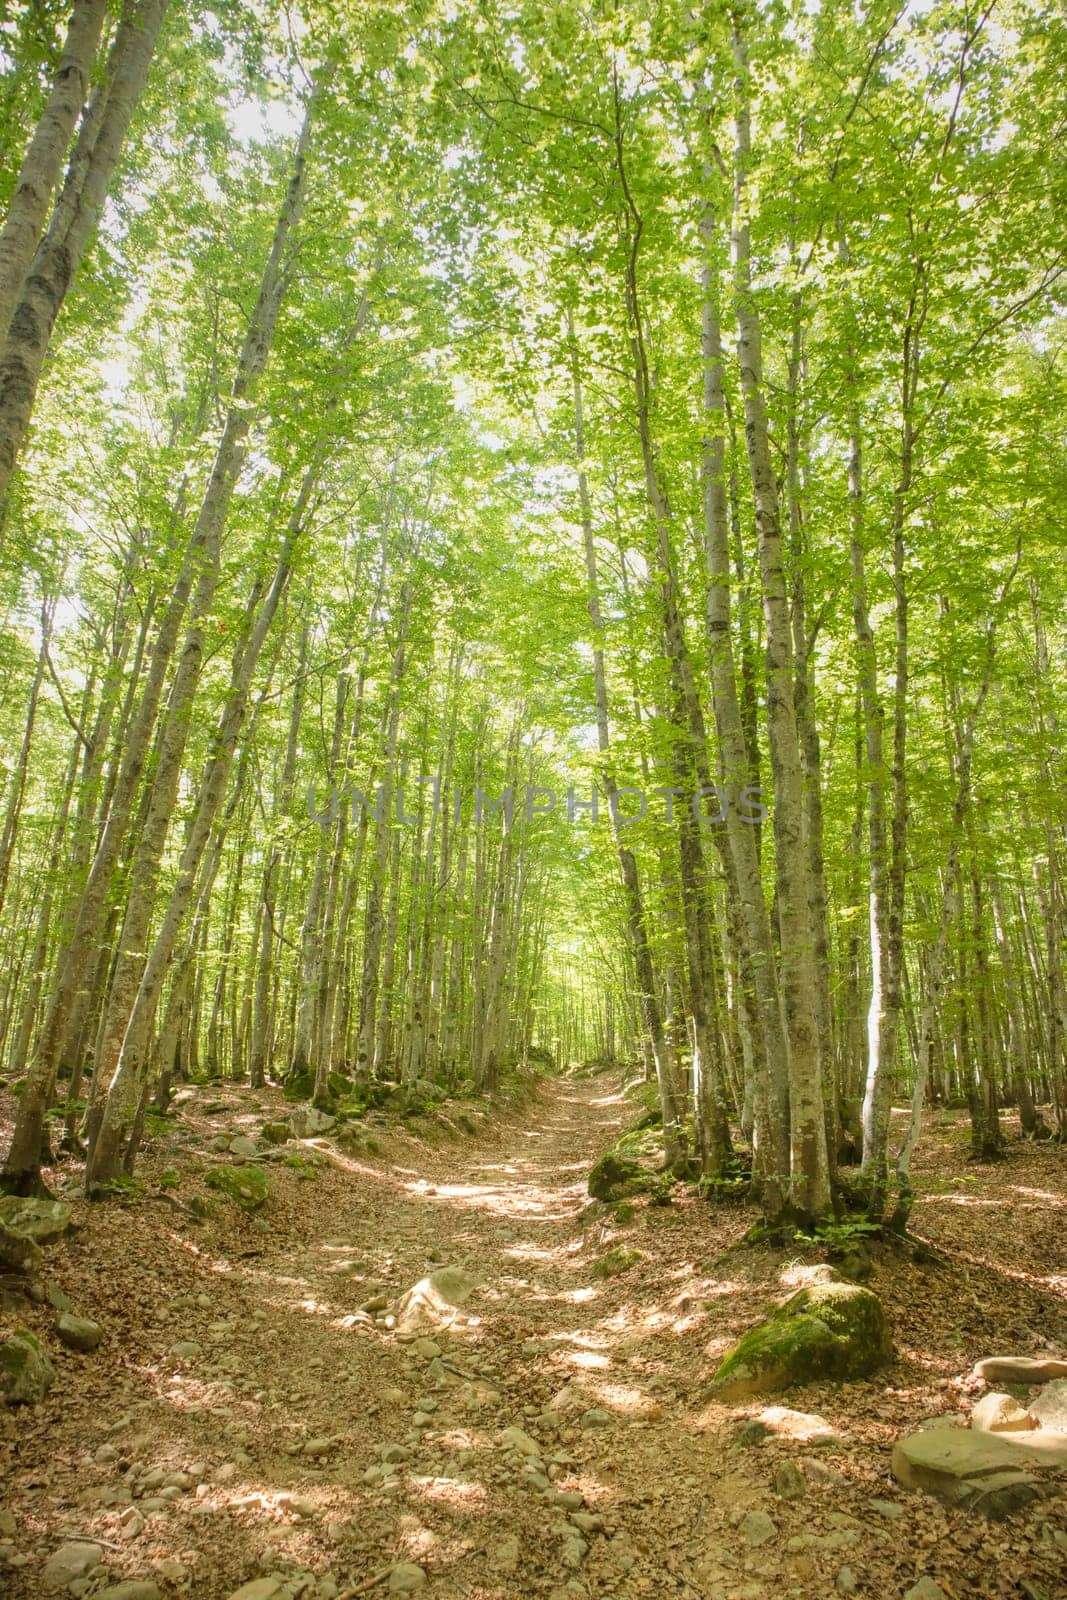 Photographic documentation of a path under a beech forest 